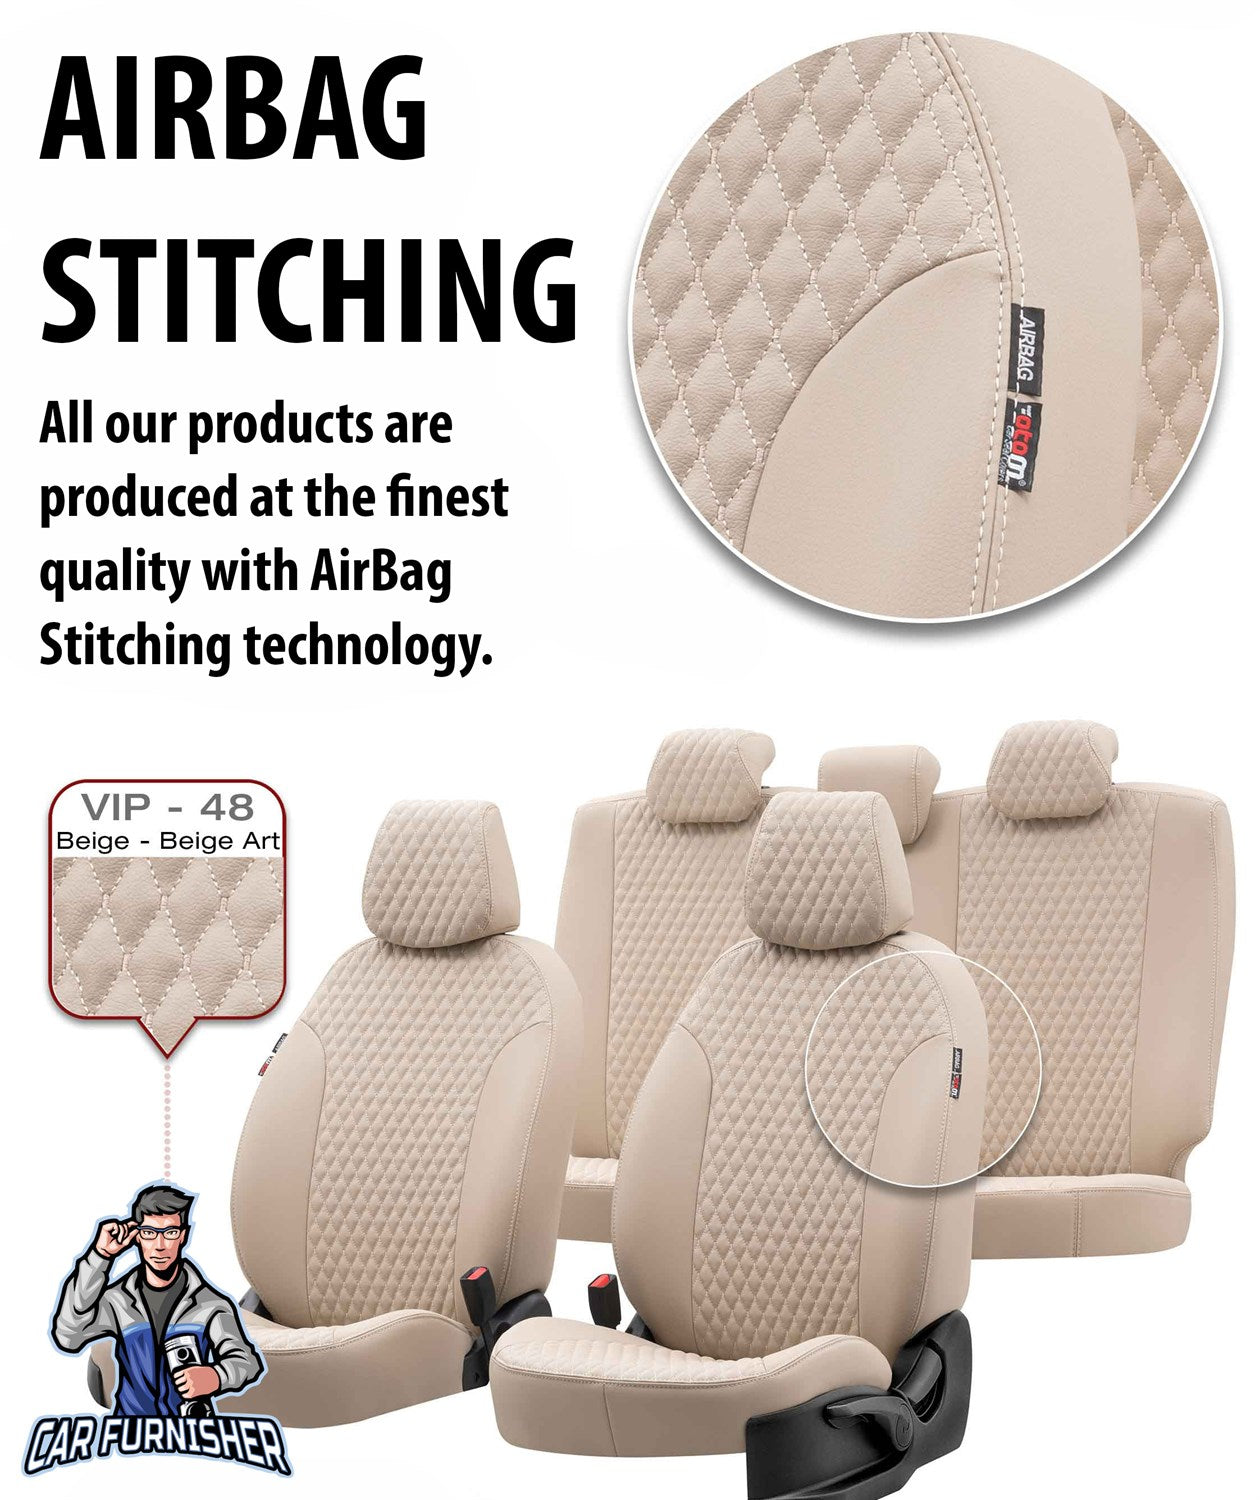 Fiat Fullback Seat Covers Amsterdam Leather Design Beige Leather